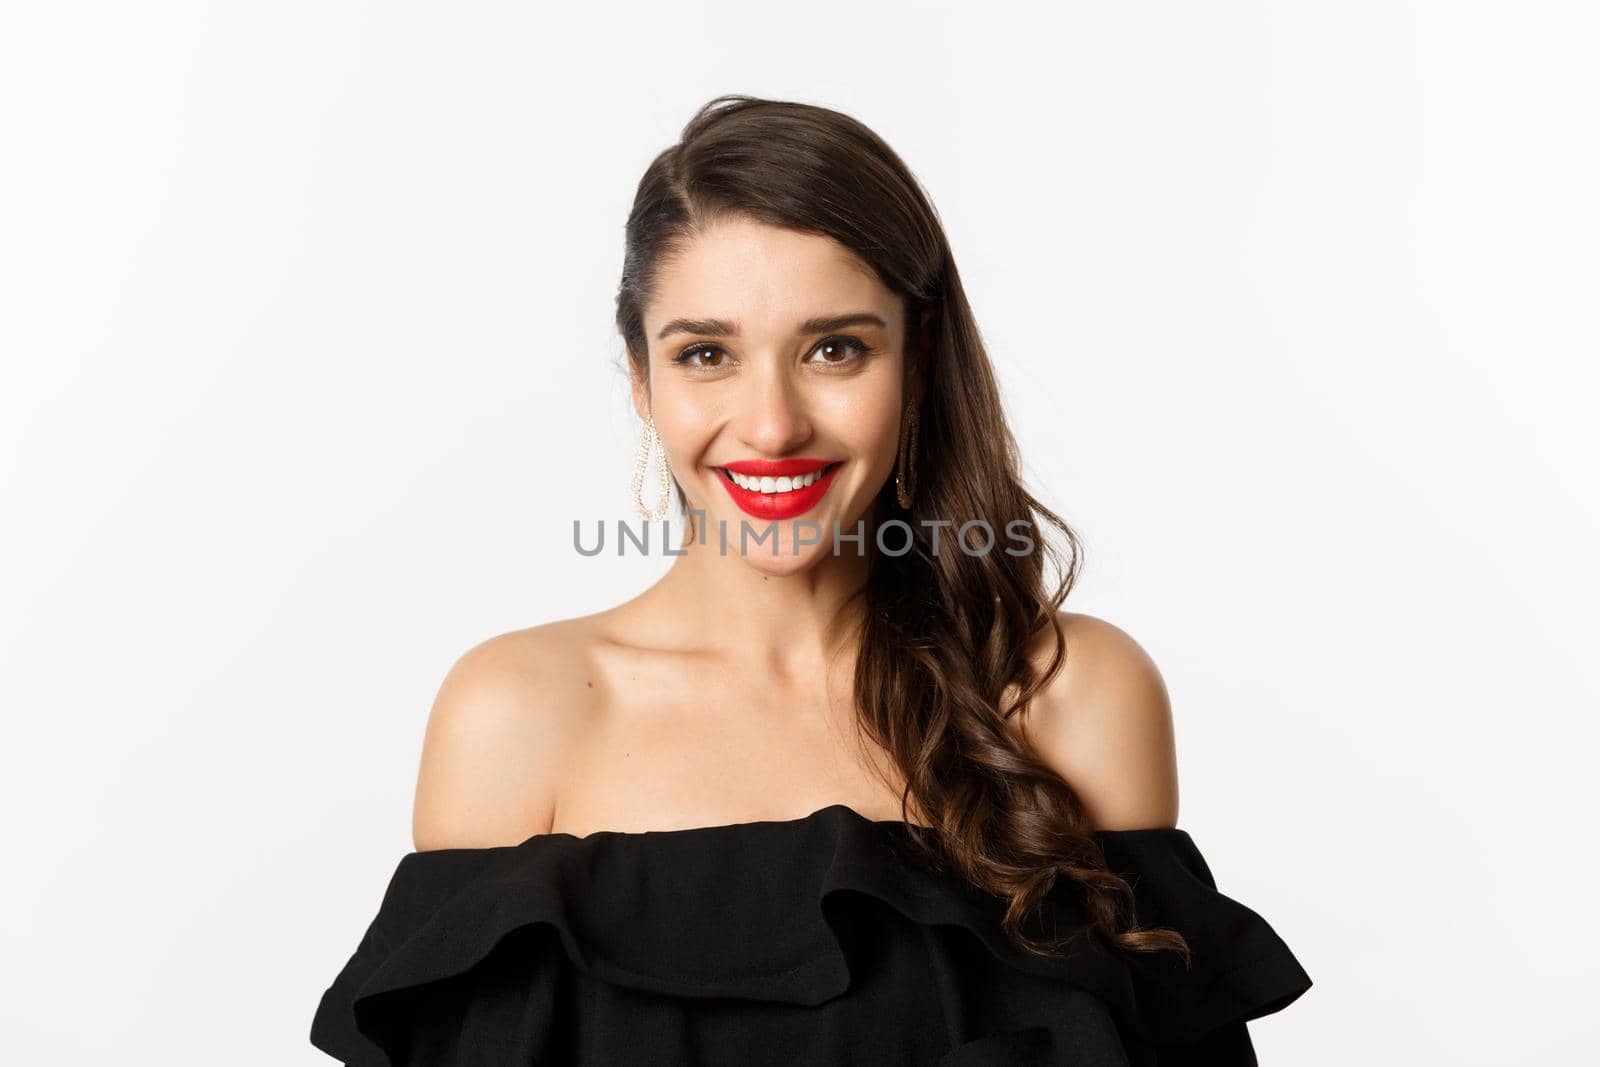 Close-up of beautiful woman dressed for party in black dress, wearing makeup and red lipstick, smiling happy at camera, white background.